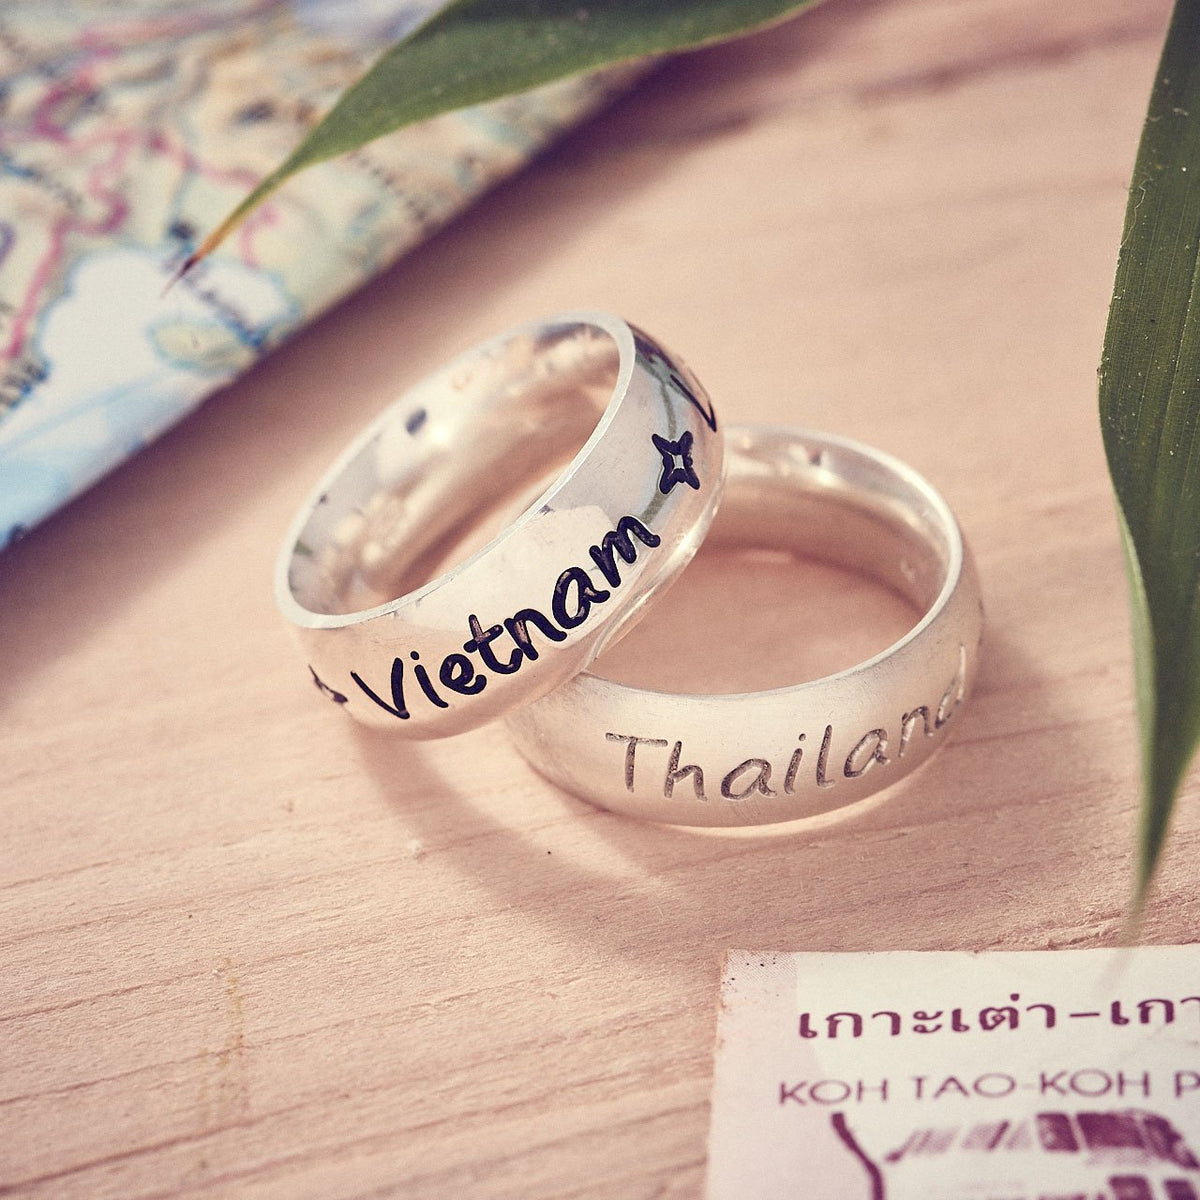 Travel gift ideas for a man, engraved chunky silver ring with country destinations